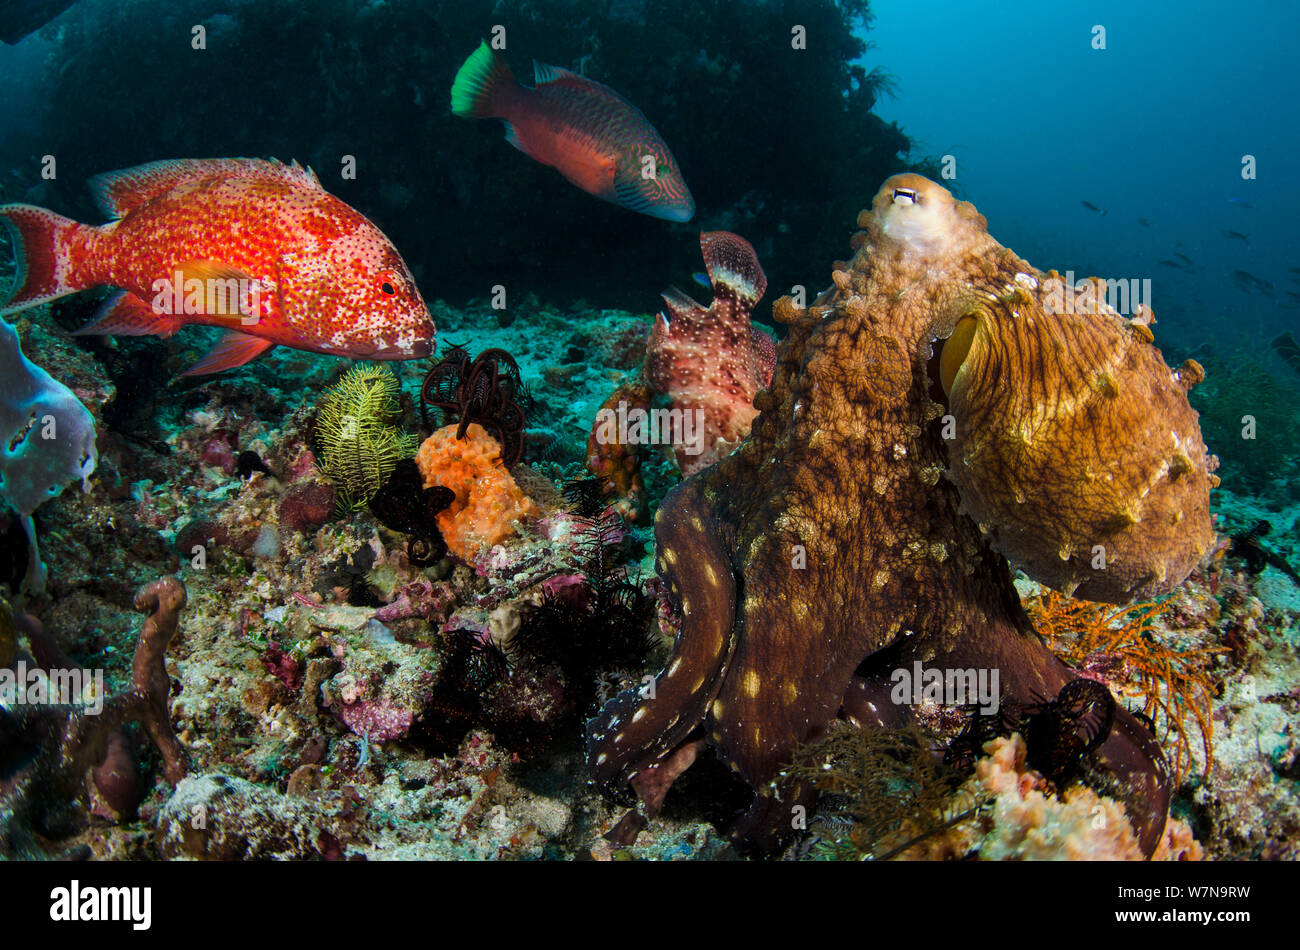 A common reef octopus (Octopus cyanea) foraging attracts several large reef fish, hoping to get an easy meal. Octopuses may try to hit fish with their arms to scare them off. Cannibal Rock, Sawu Sea, Rinca, Komodo National Park, Indonesia. Stock Photo